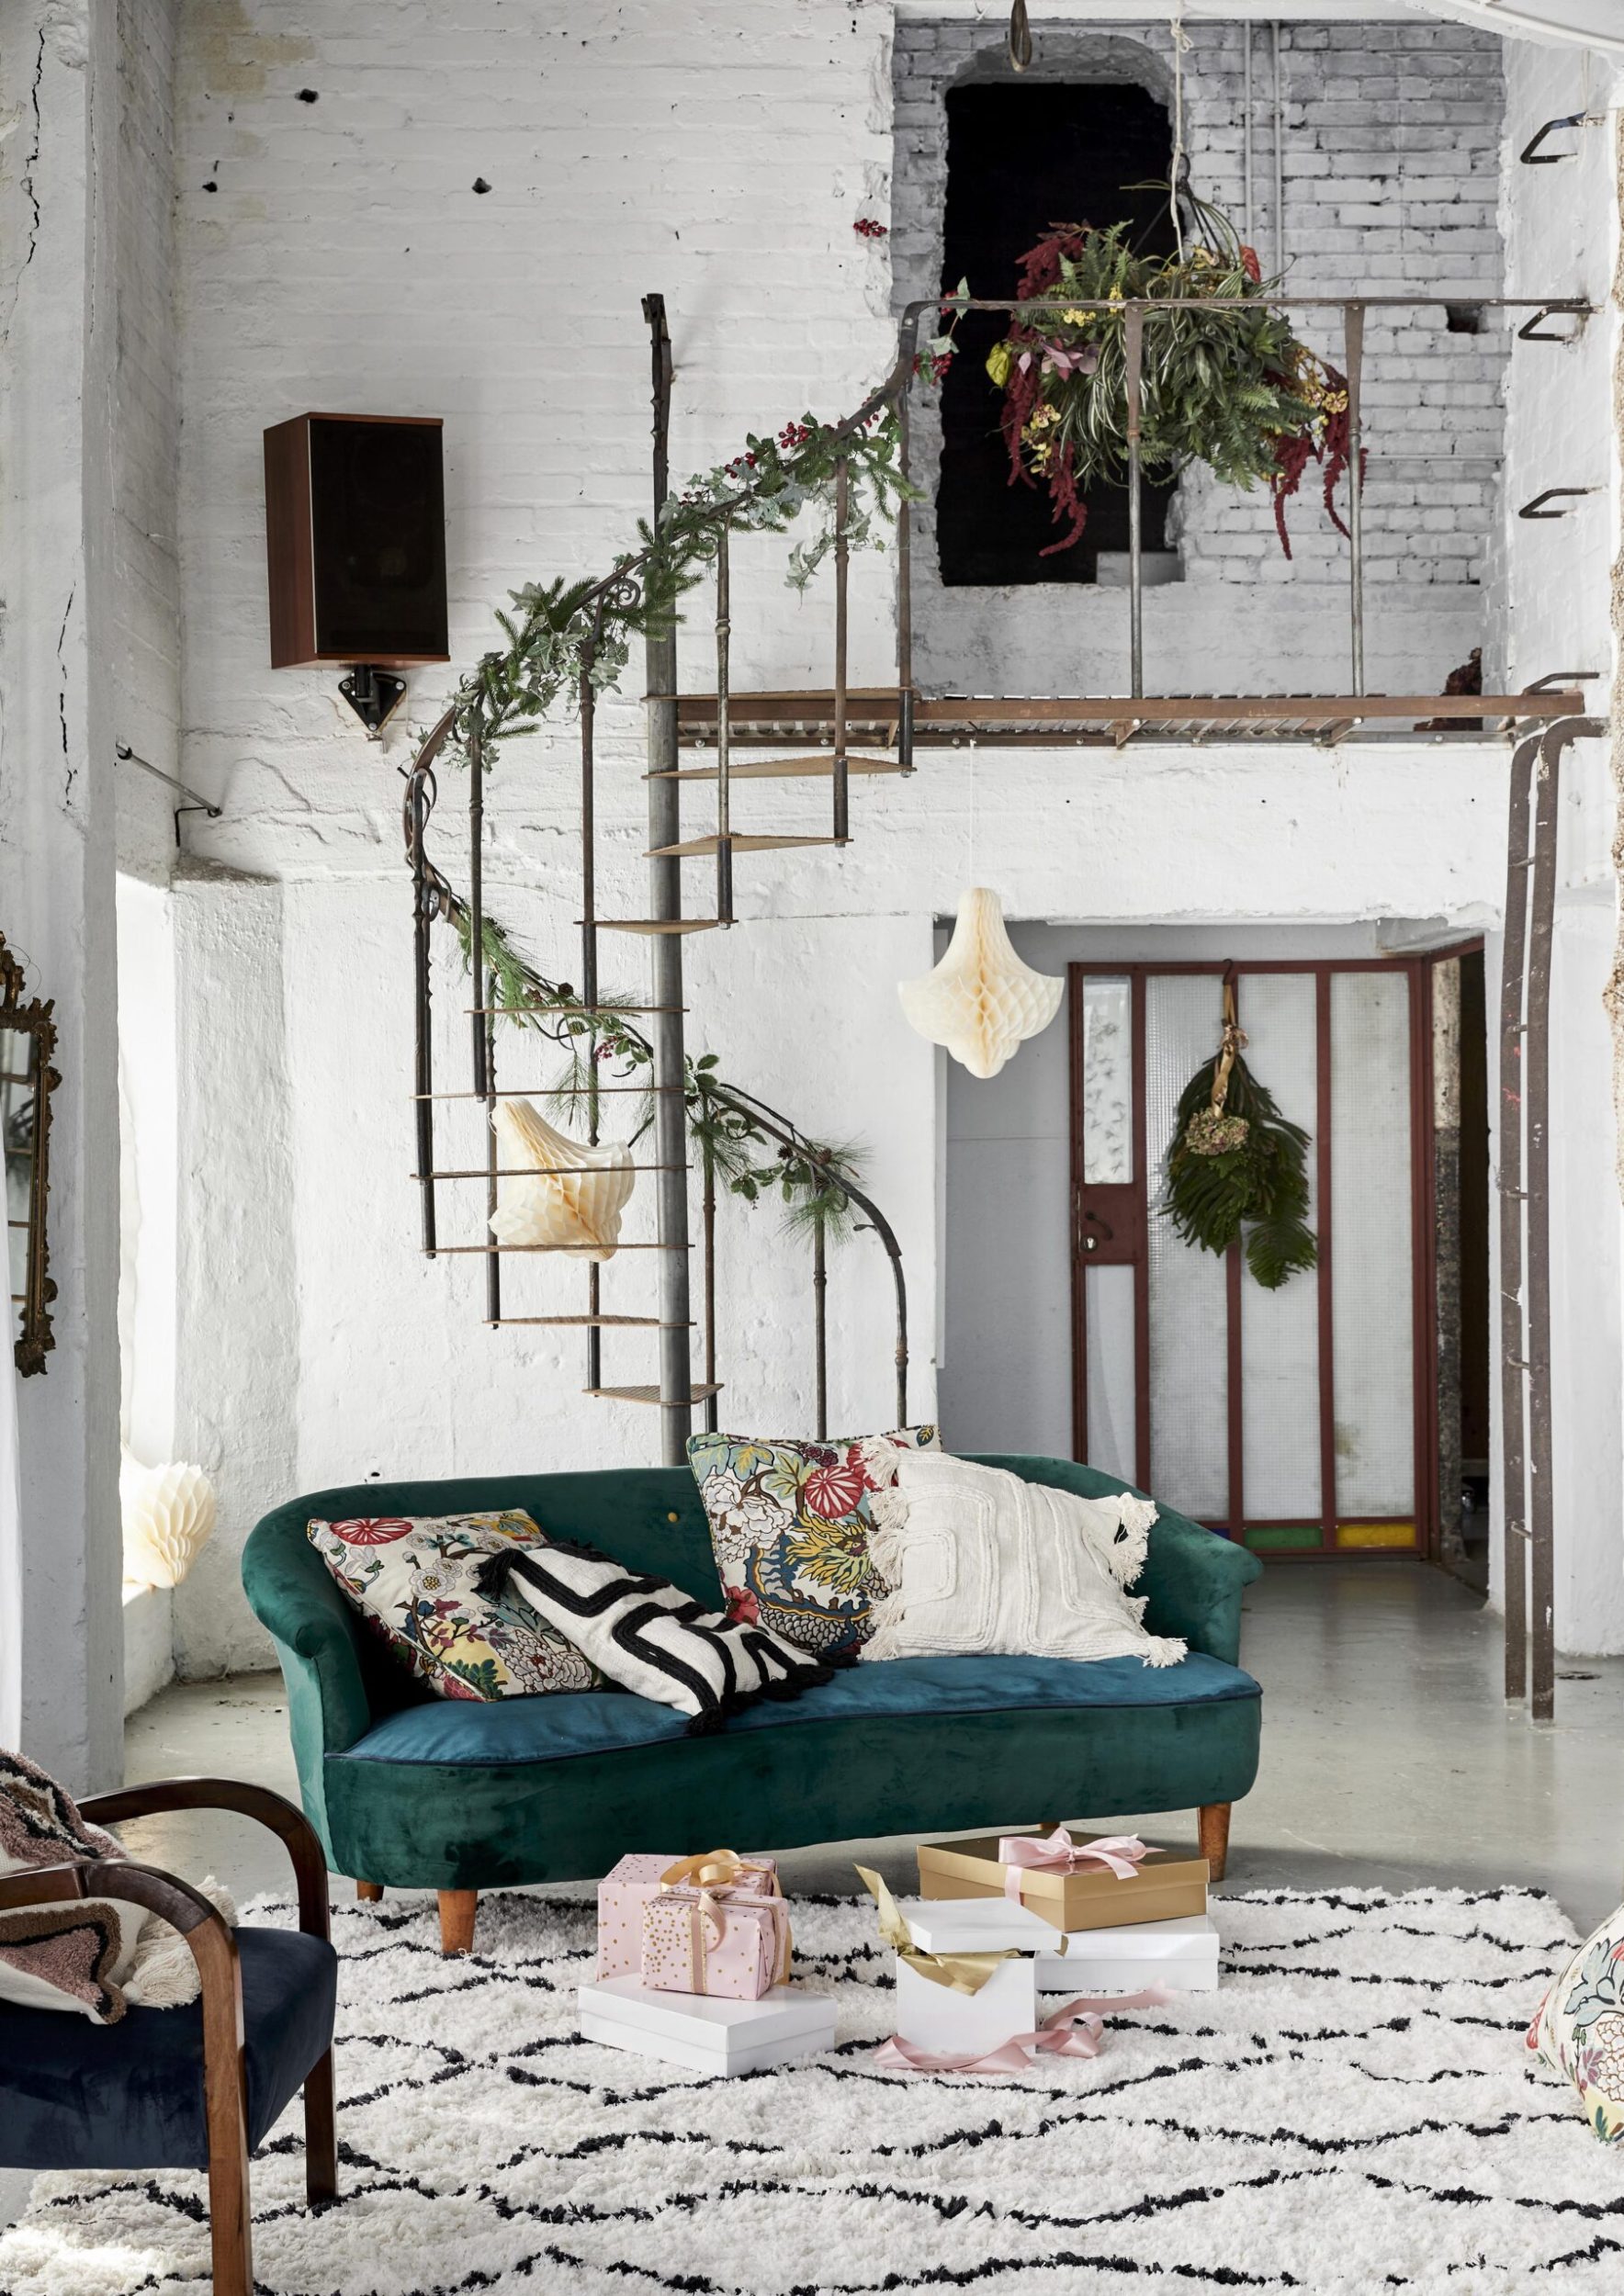 paper decorations hanging from a ceiling and a stairwell, there is a green couch in front of the staircase, a garland hangs around the balustrade